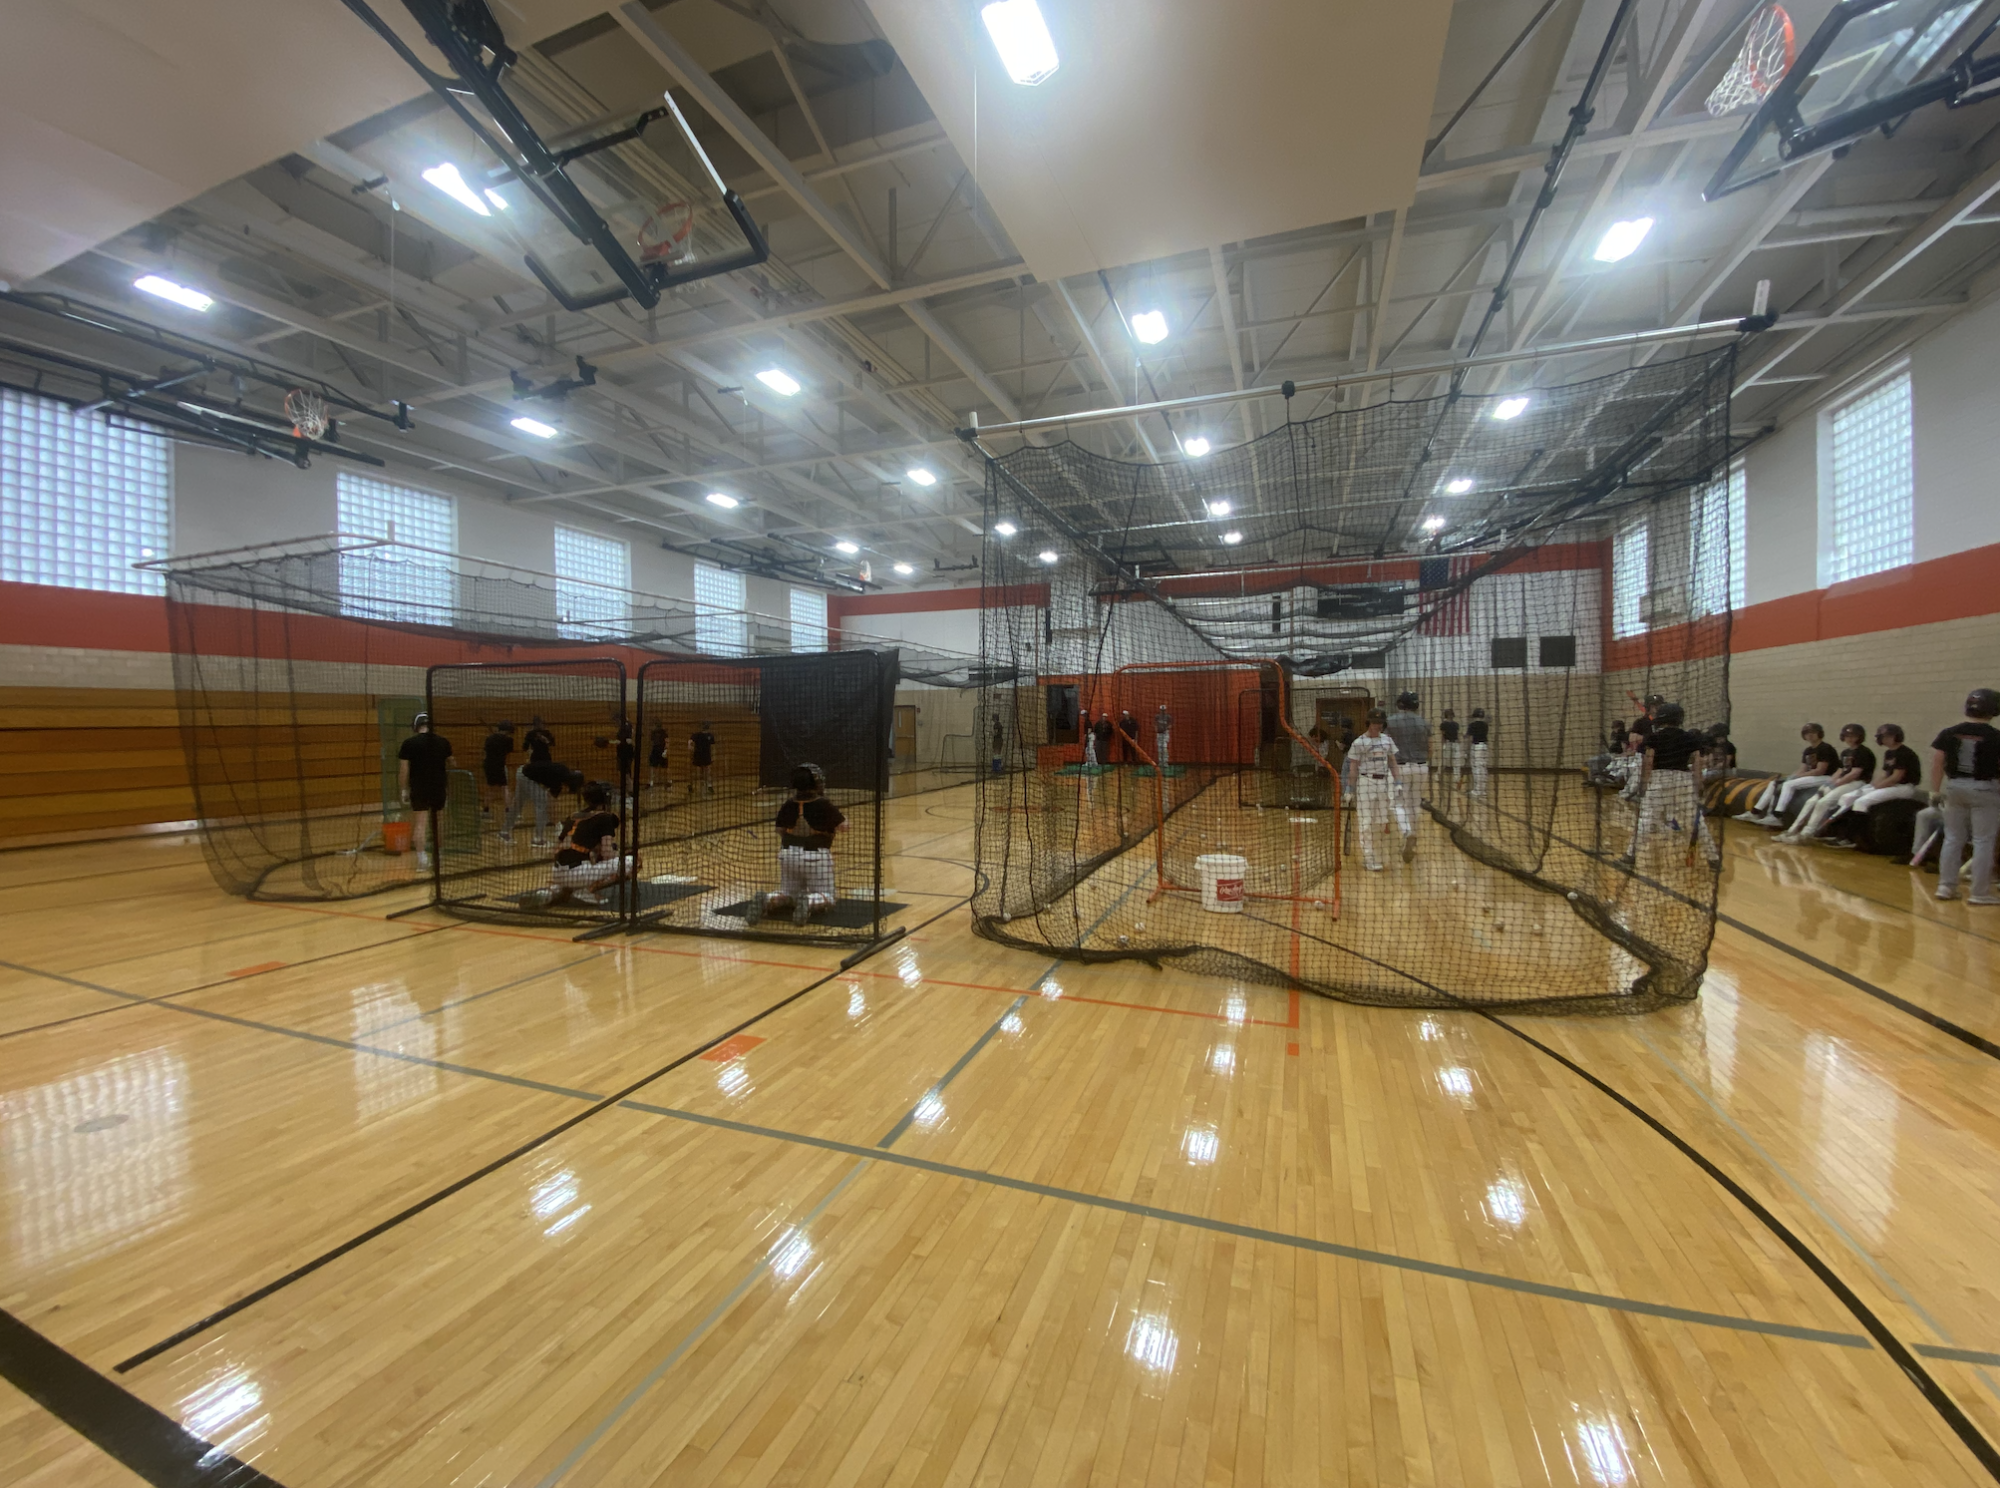 The converted basketball gym McHenry's baseball team would use for practice during winter months.